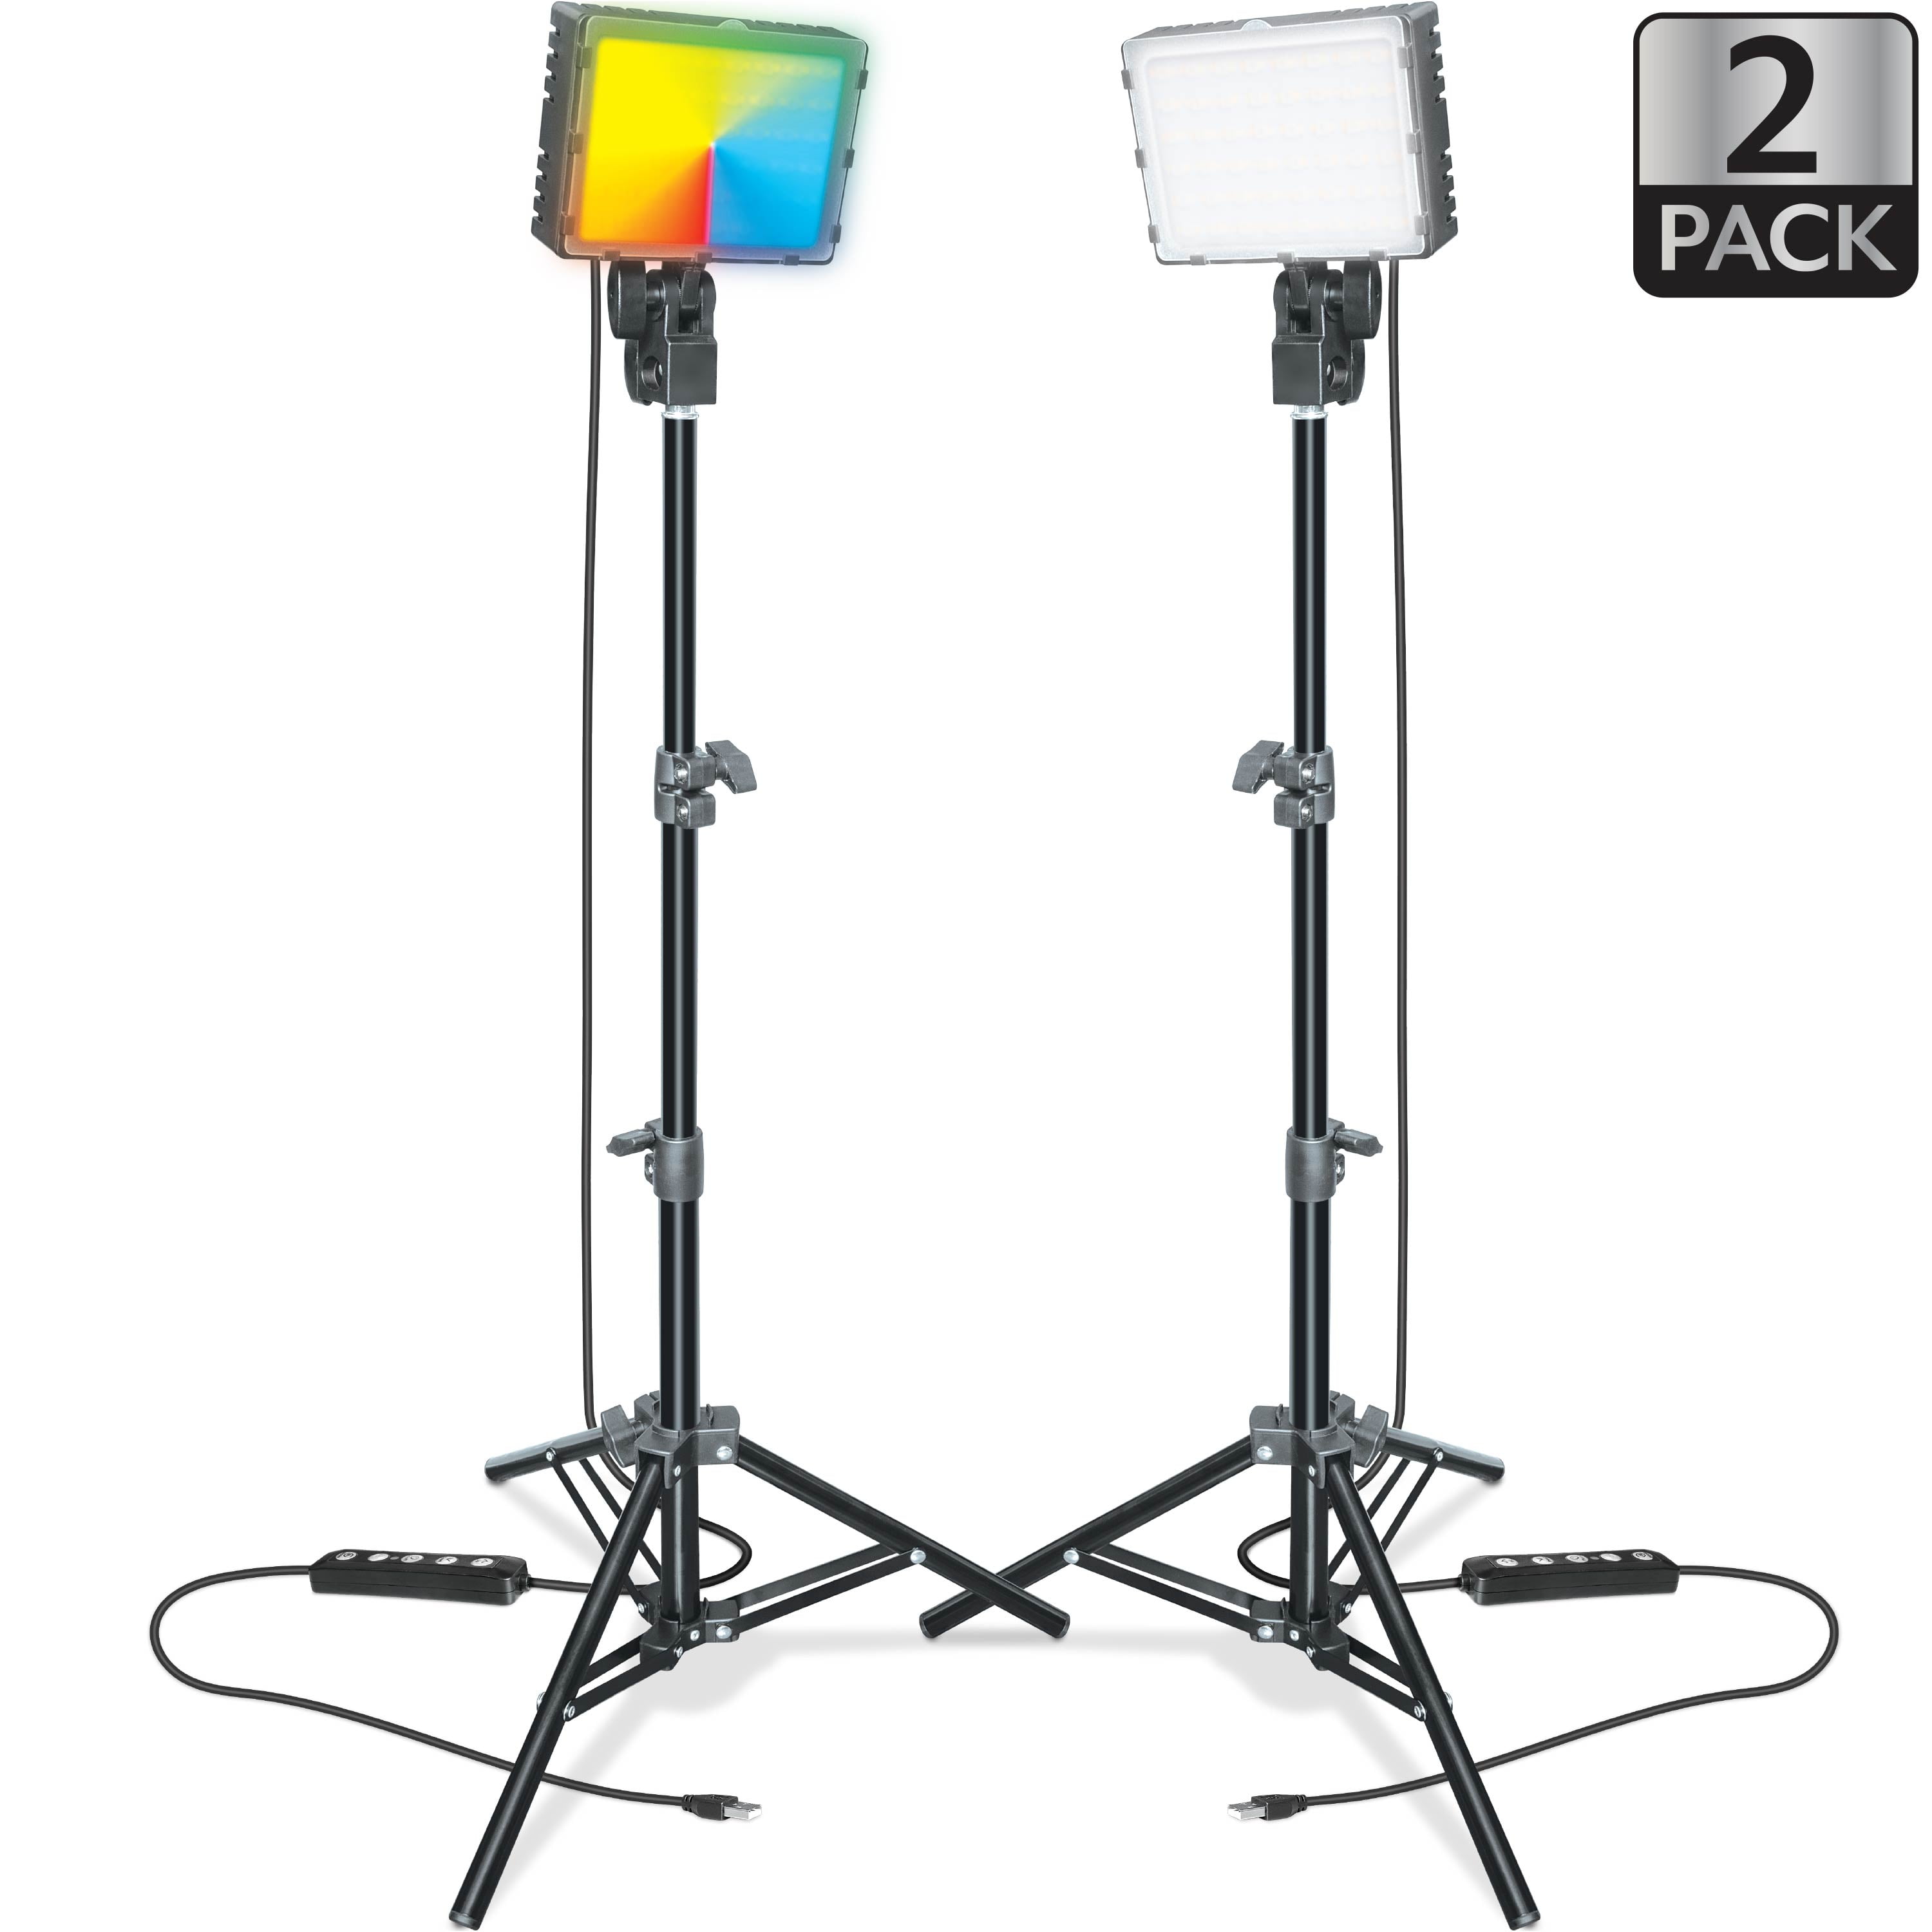 Bower 2-Pack Content Creator LED Light Kit Features RGB, White Light Modes, and Special Effects Modes to Create Brilliant Content